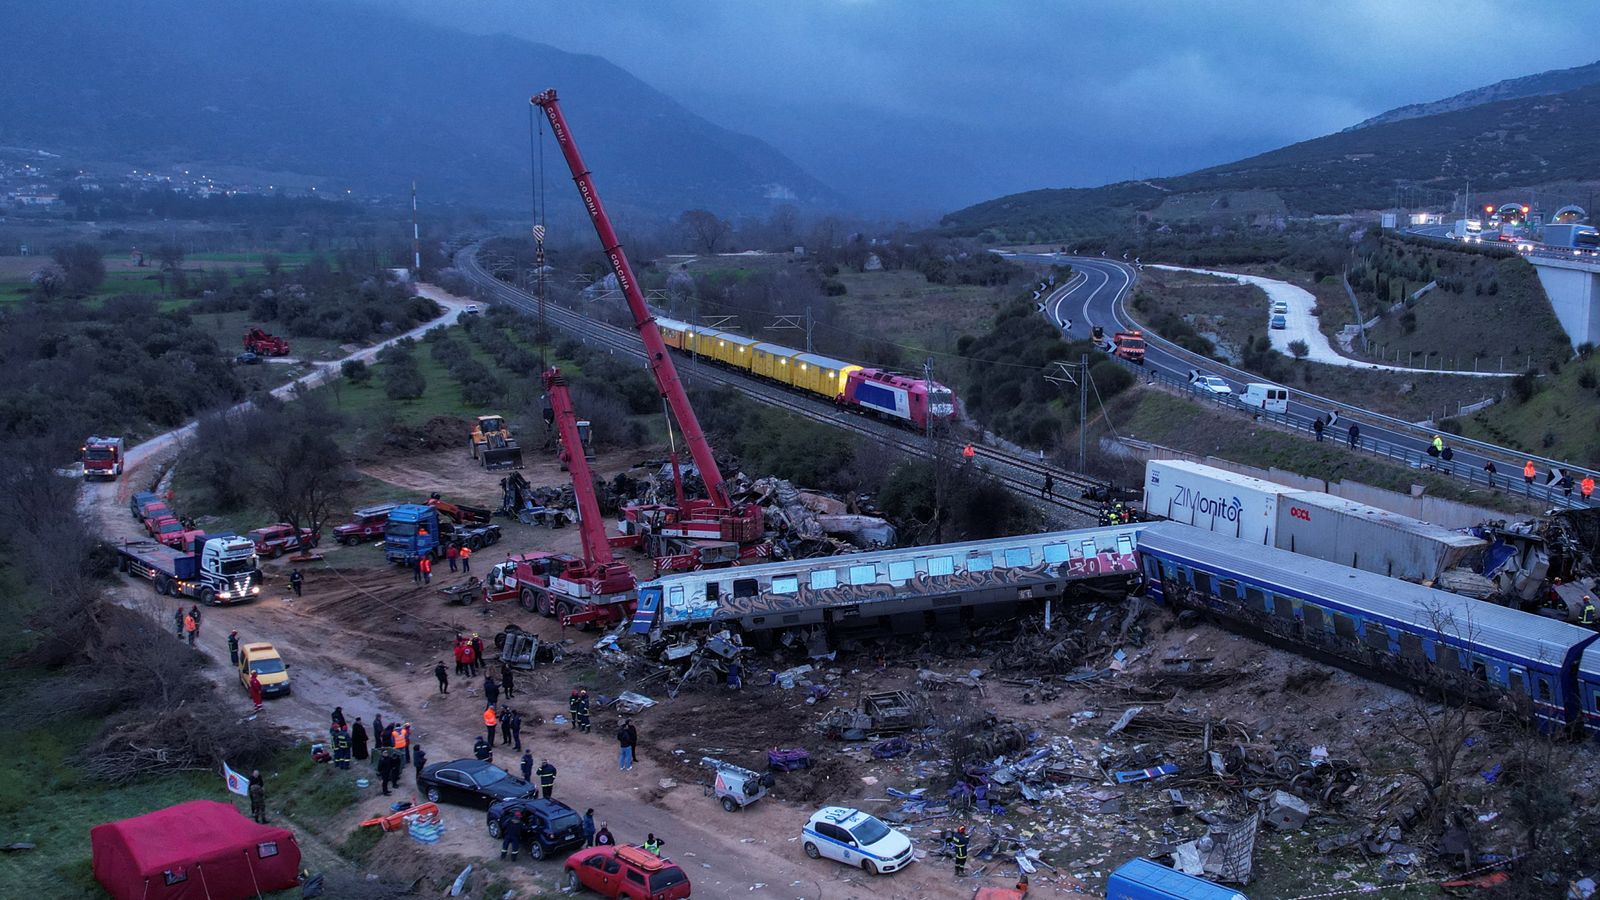 Greece train crash which left 43 dead was 'mainly due to tragic human error', prime minister says